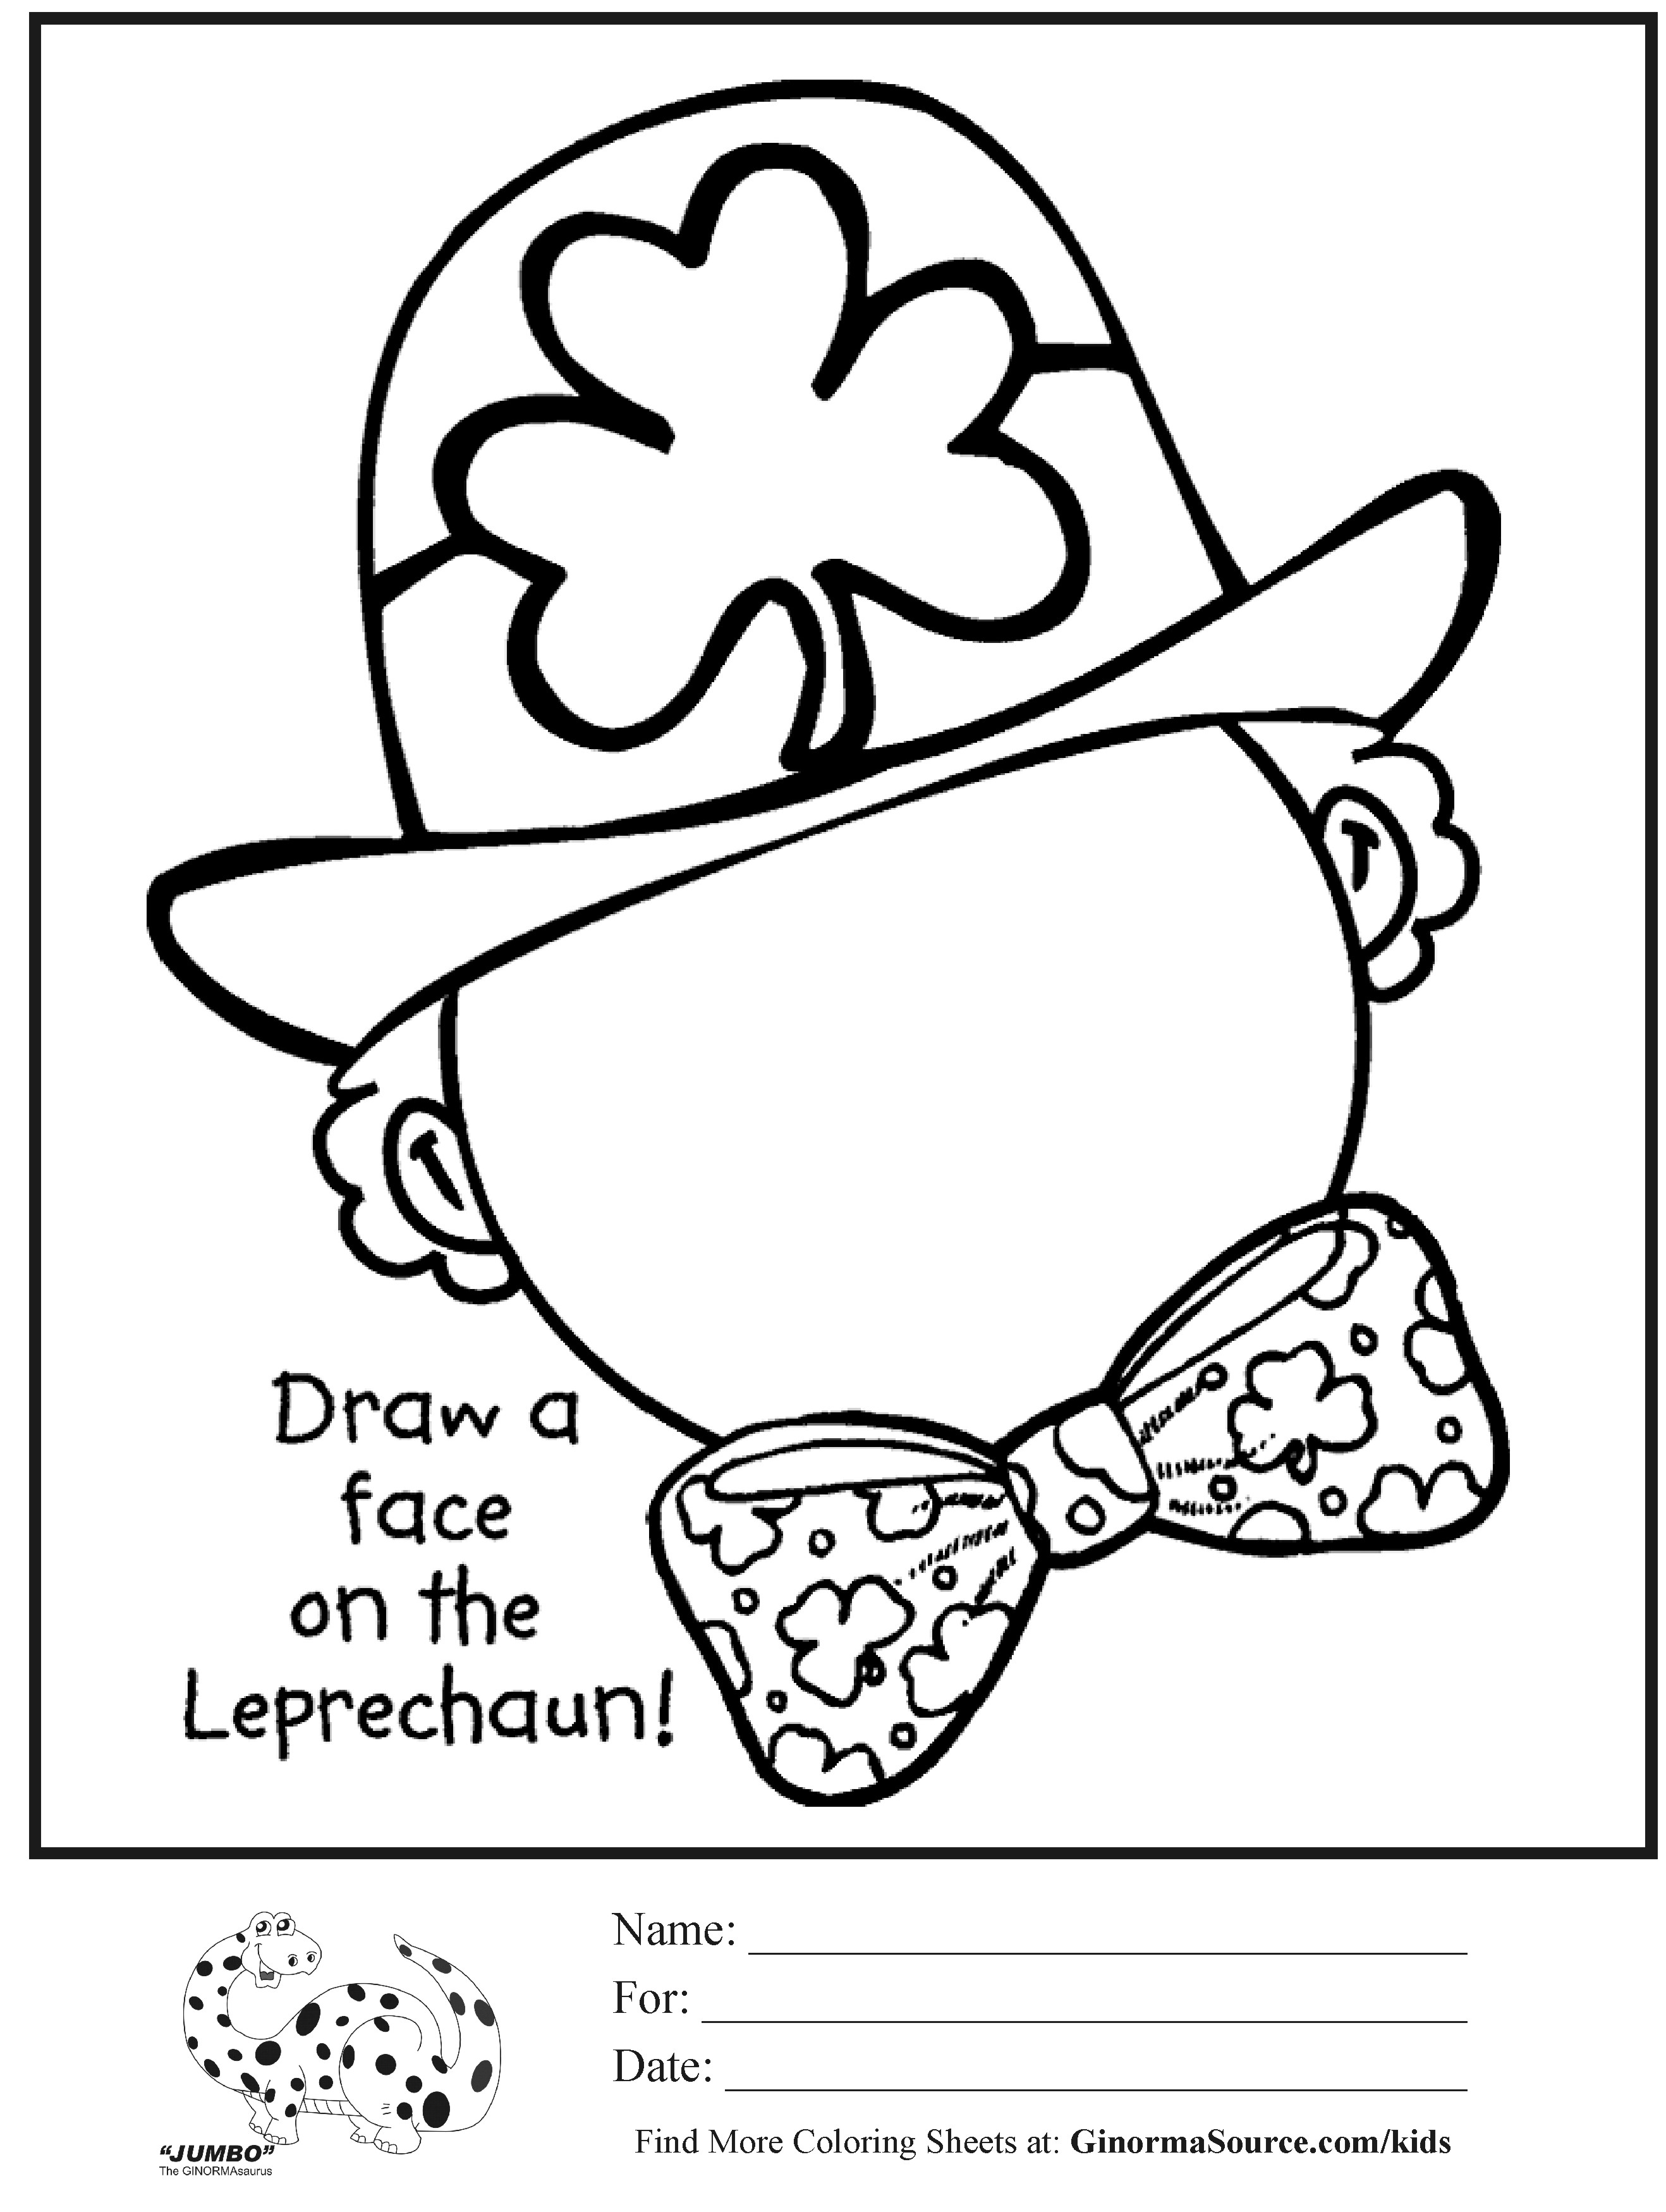 coloring-pages-free-st-patricks-day